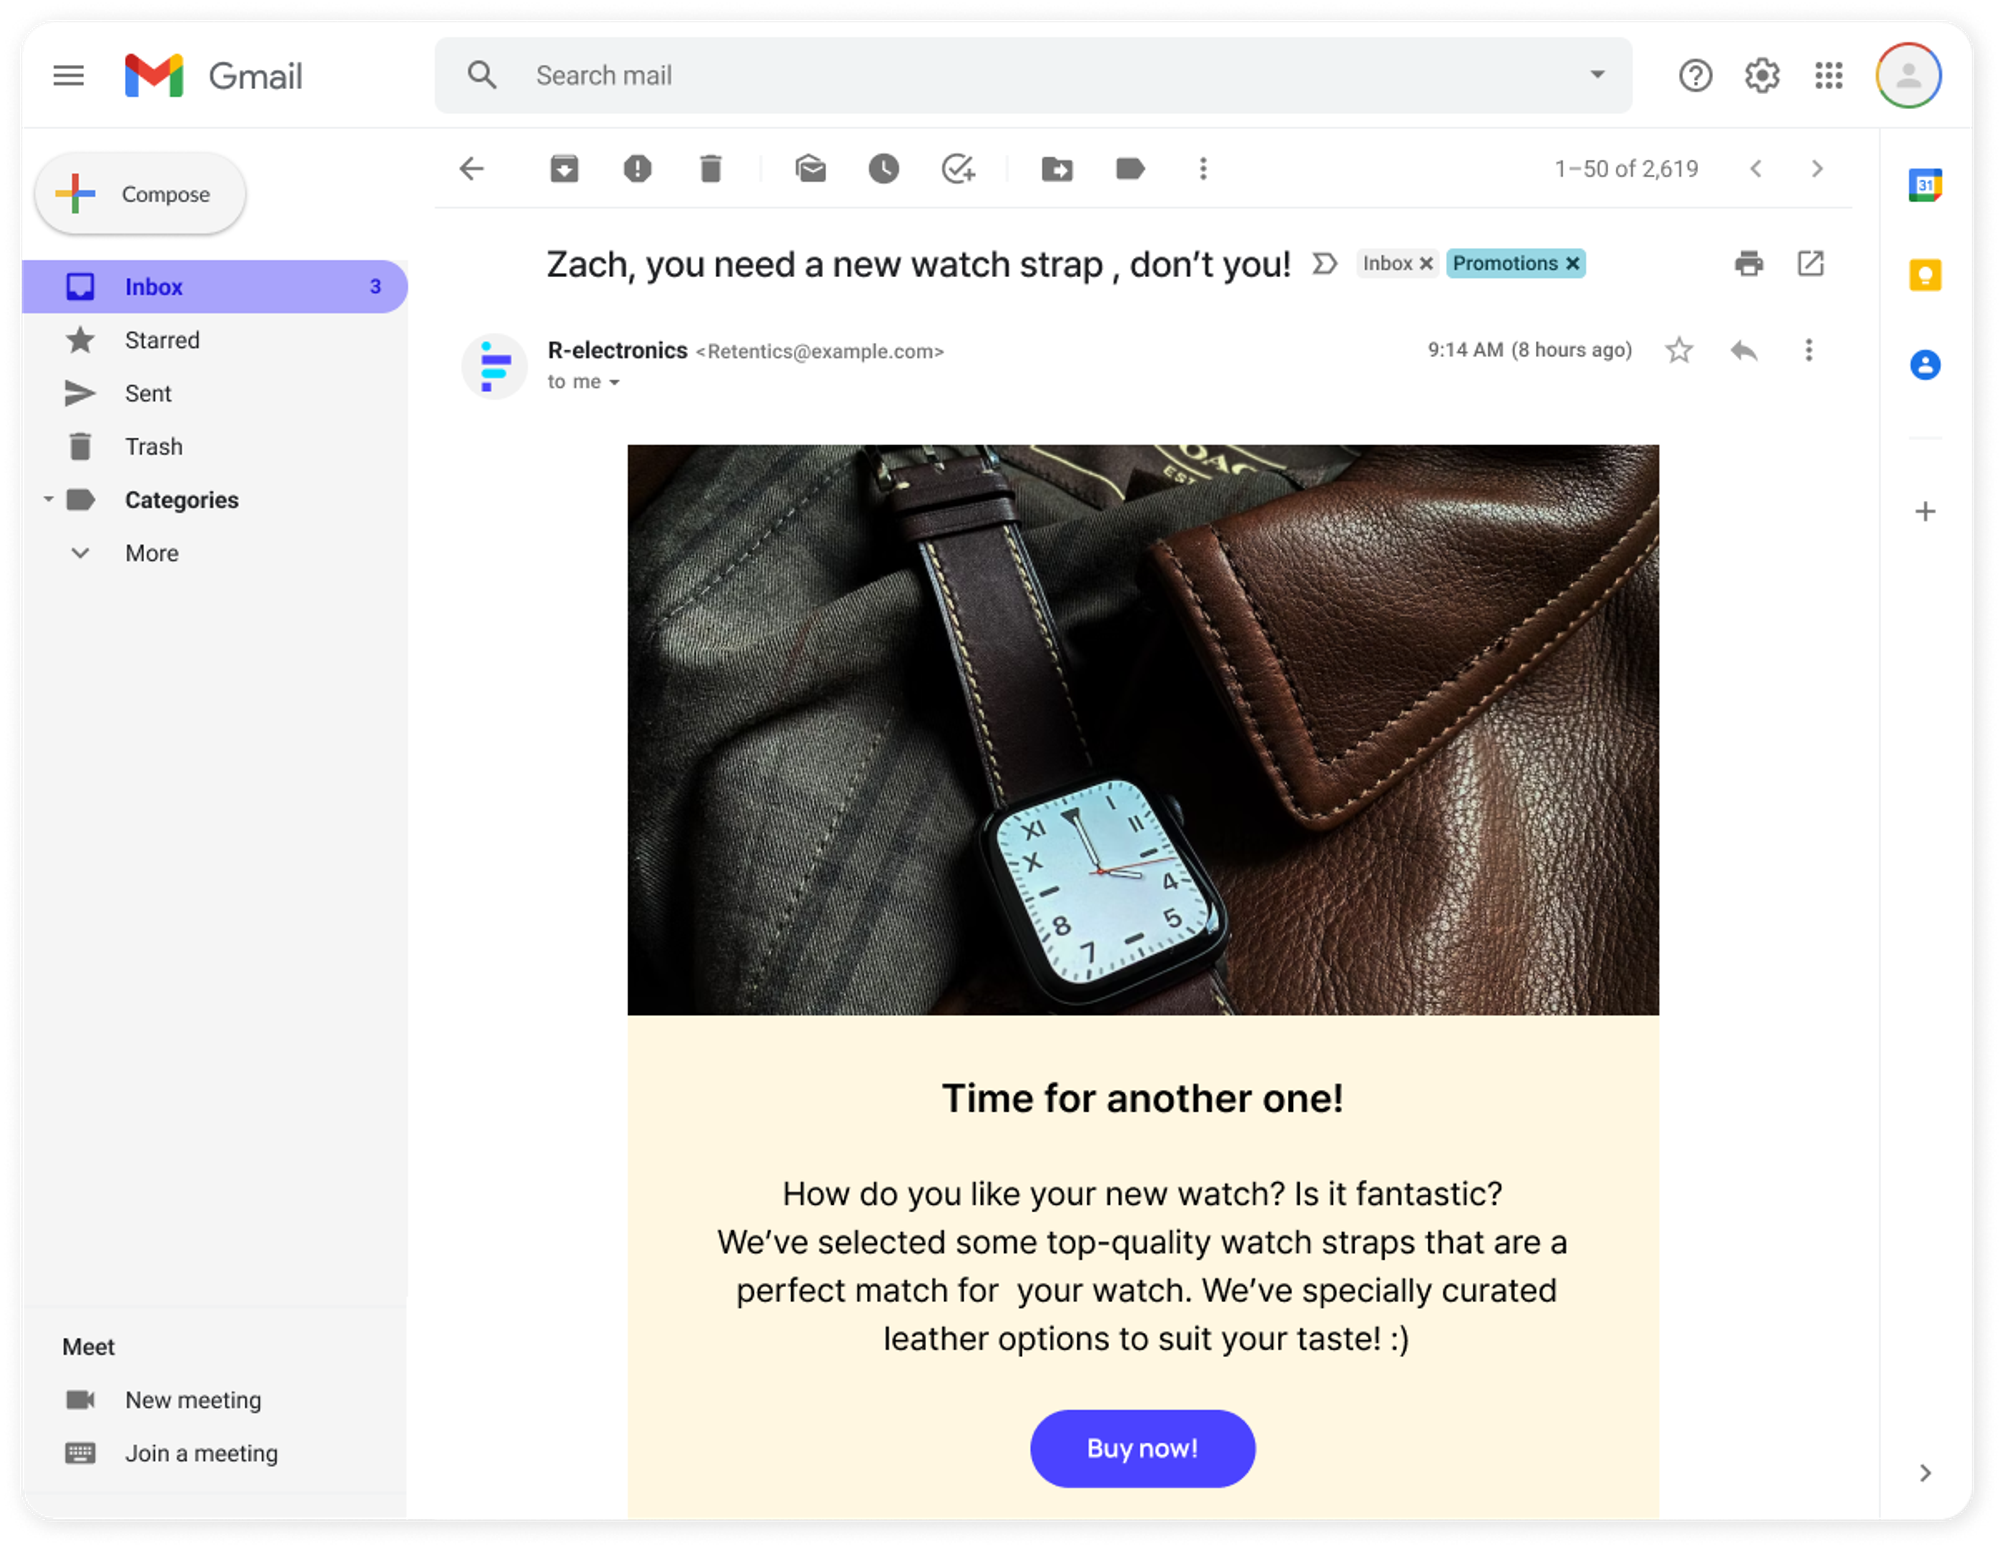 Examples of personalized email